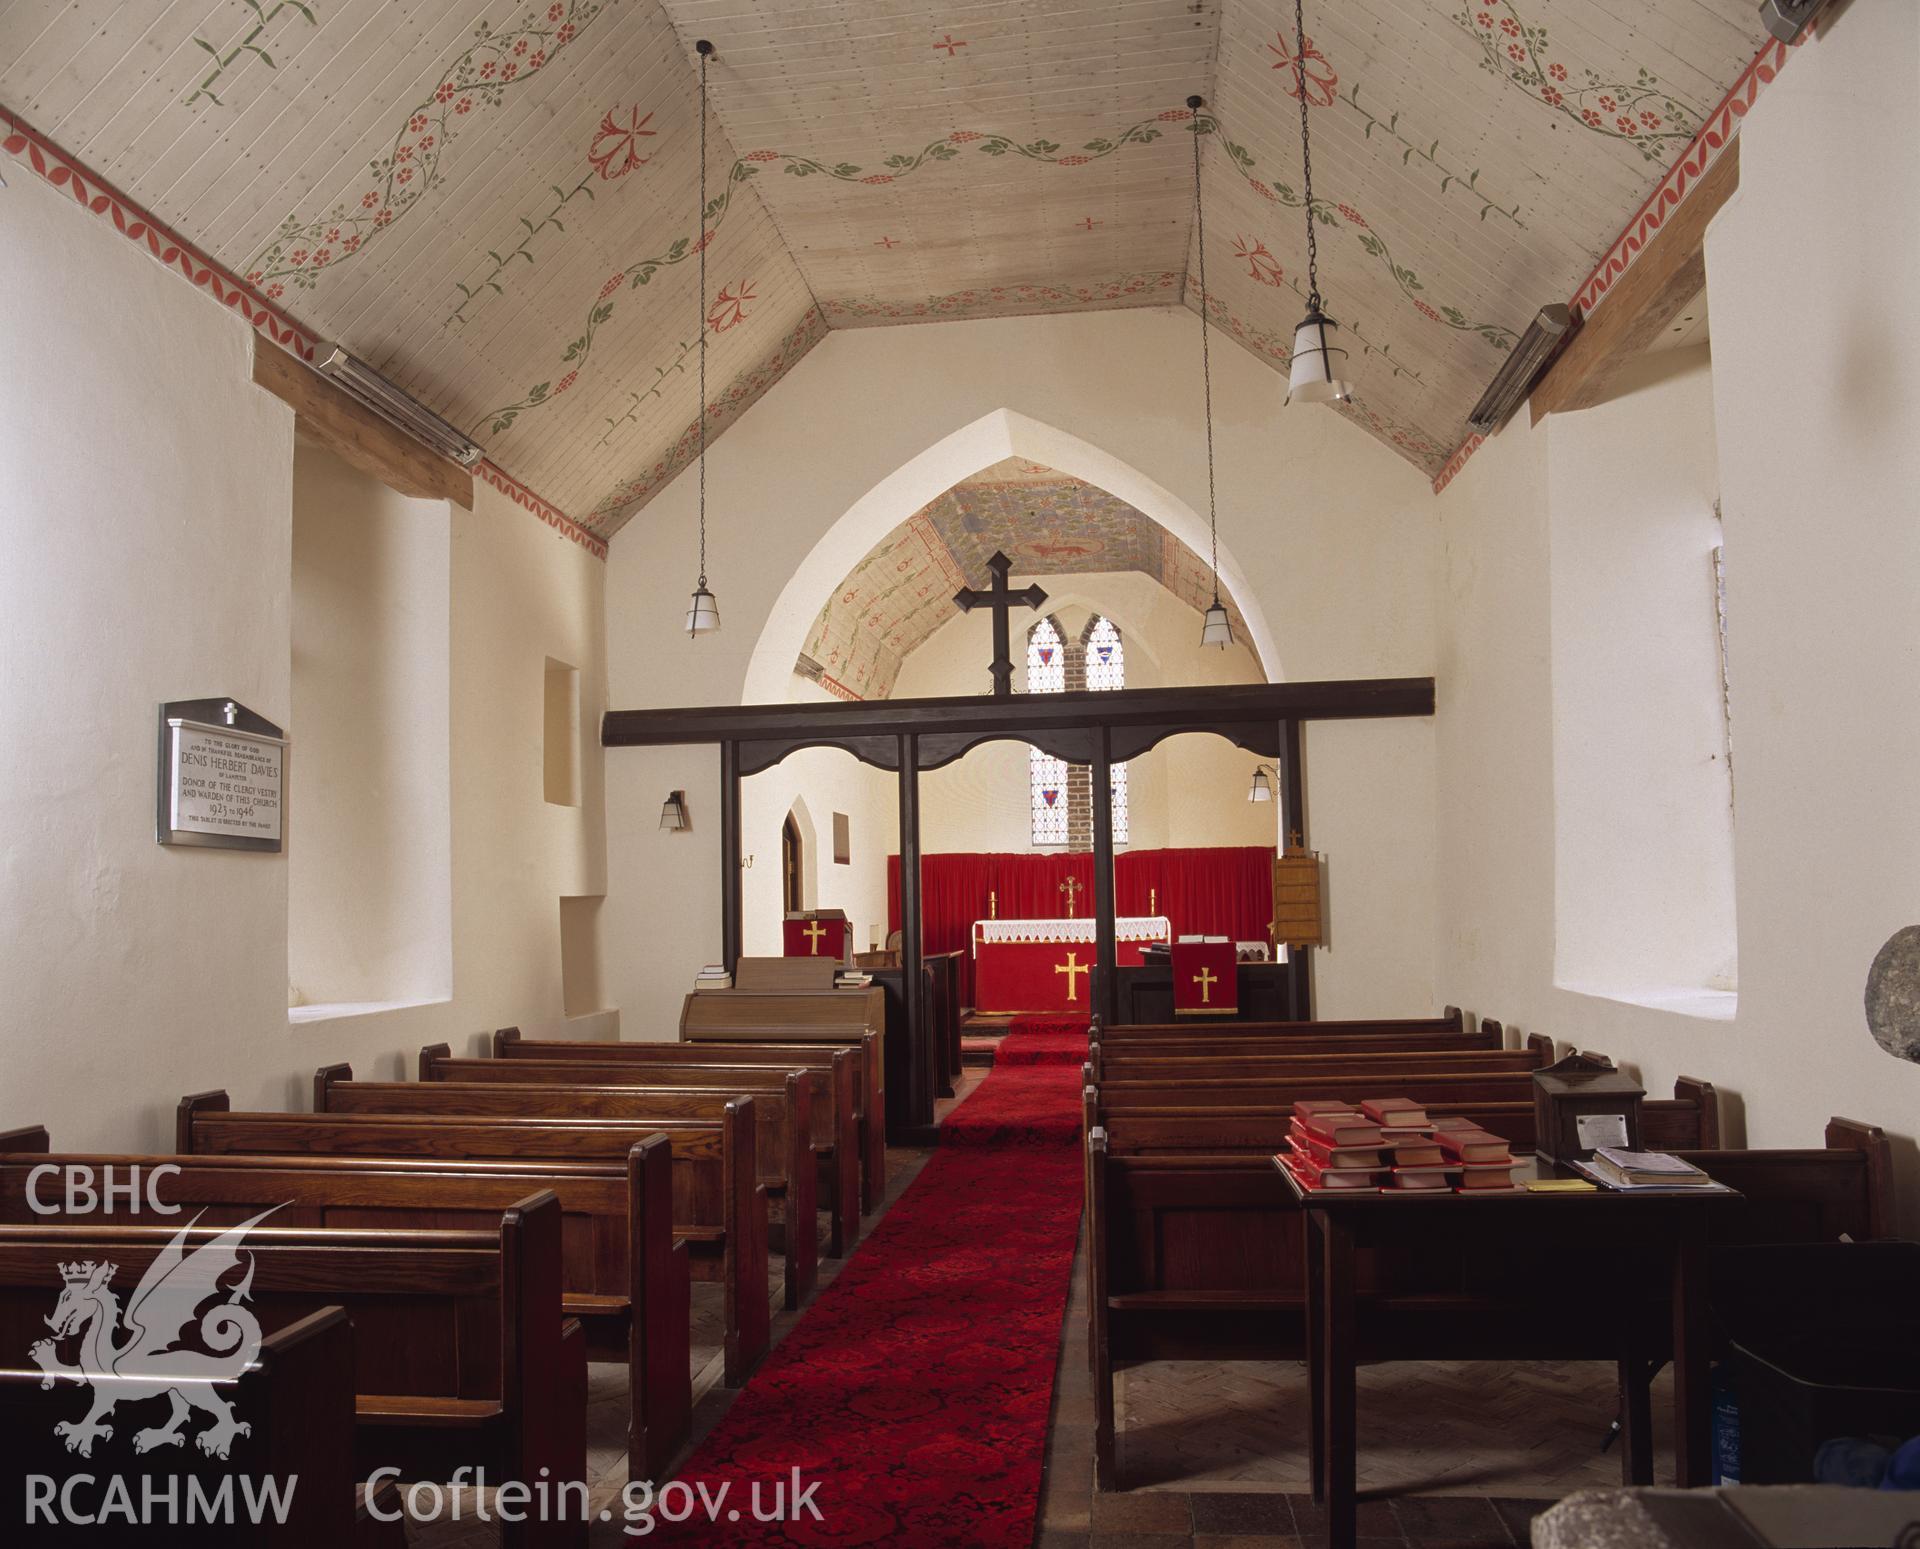 RCAHMW colour transparency showing interior view of All Saint's Church, Cellan.